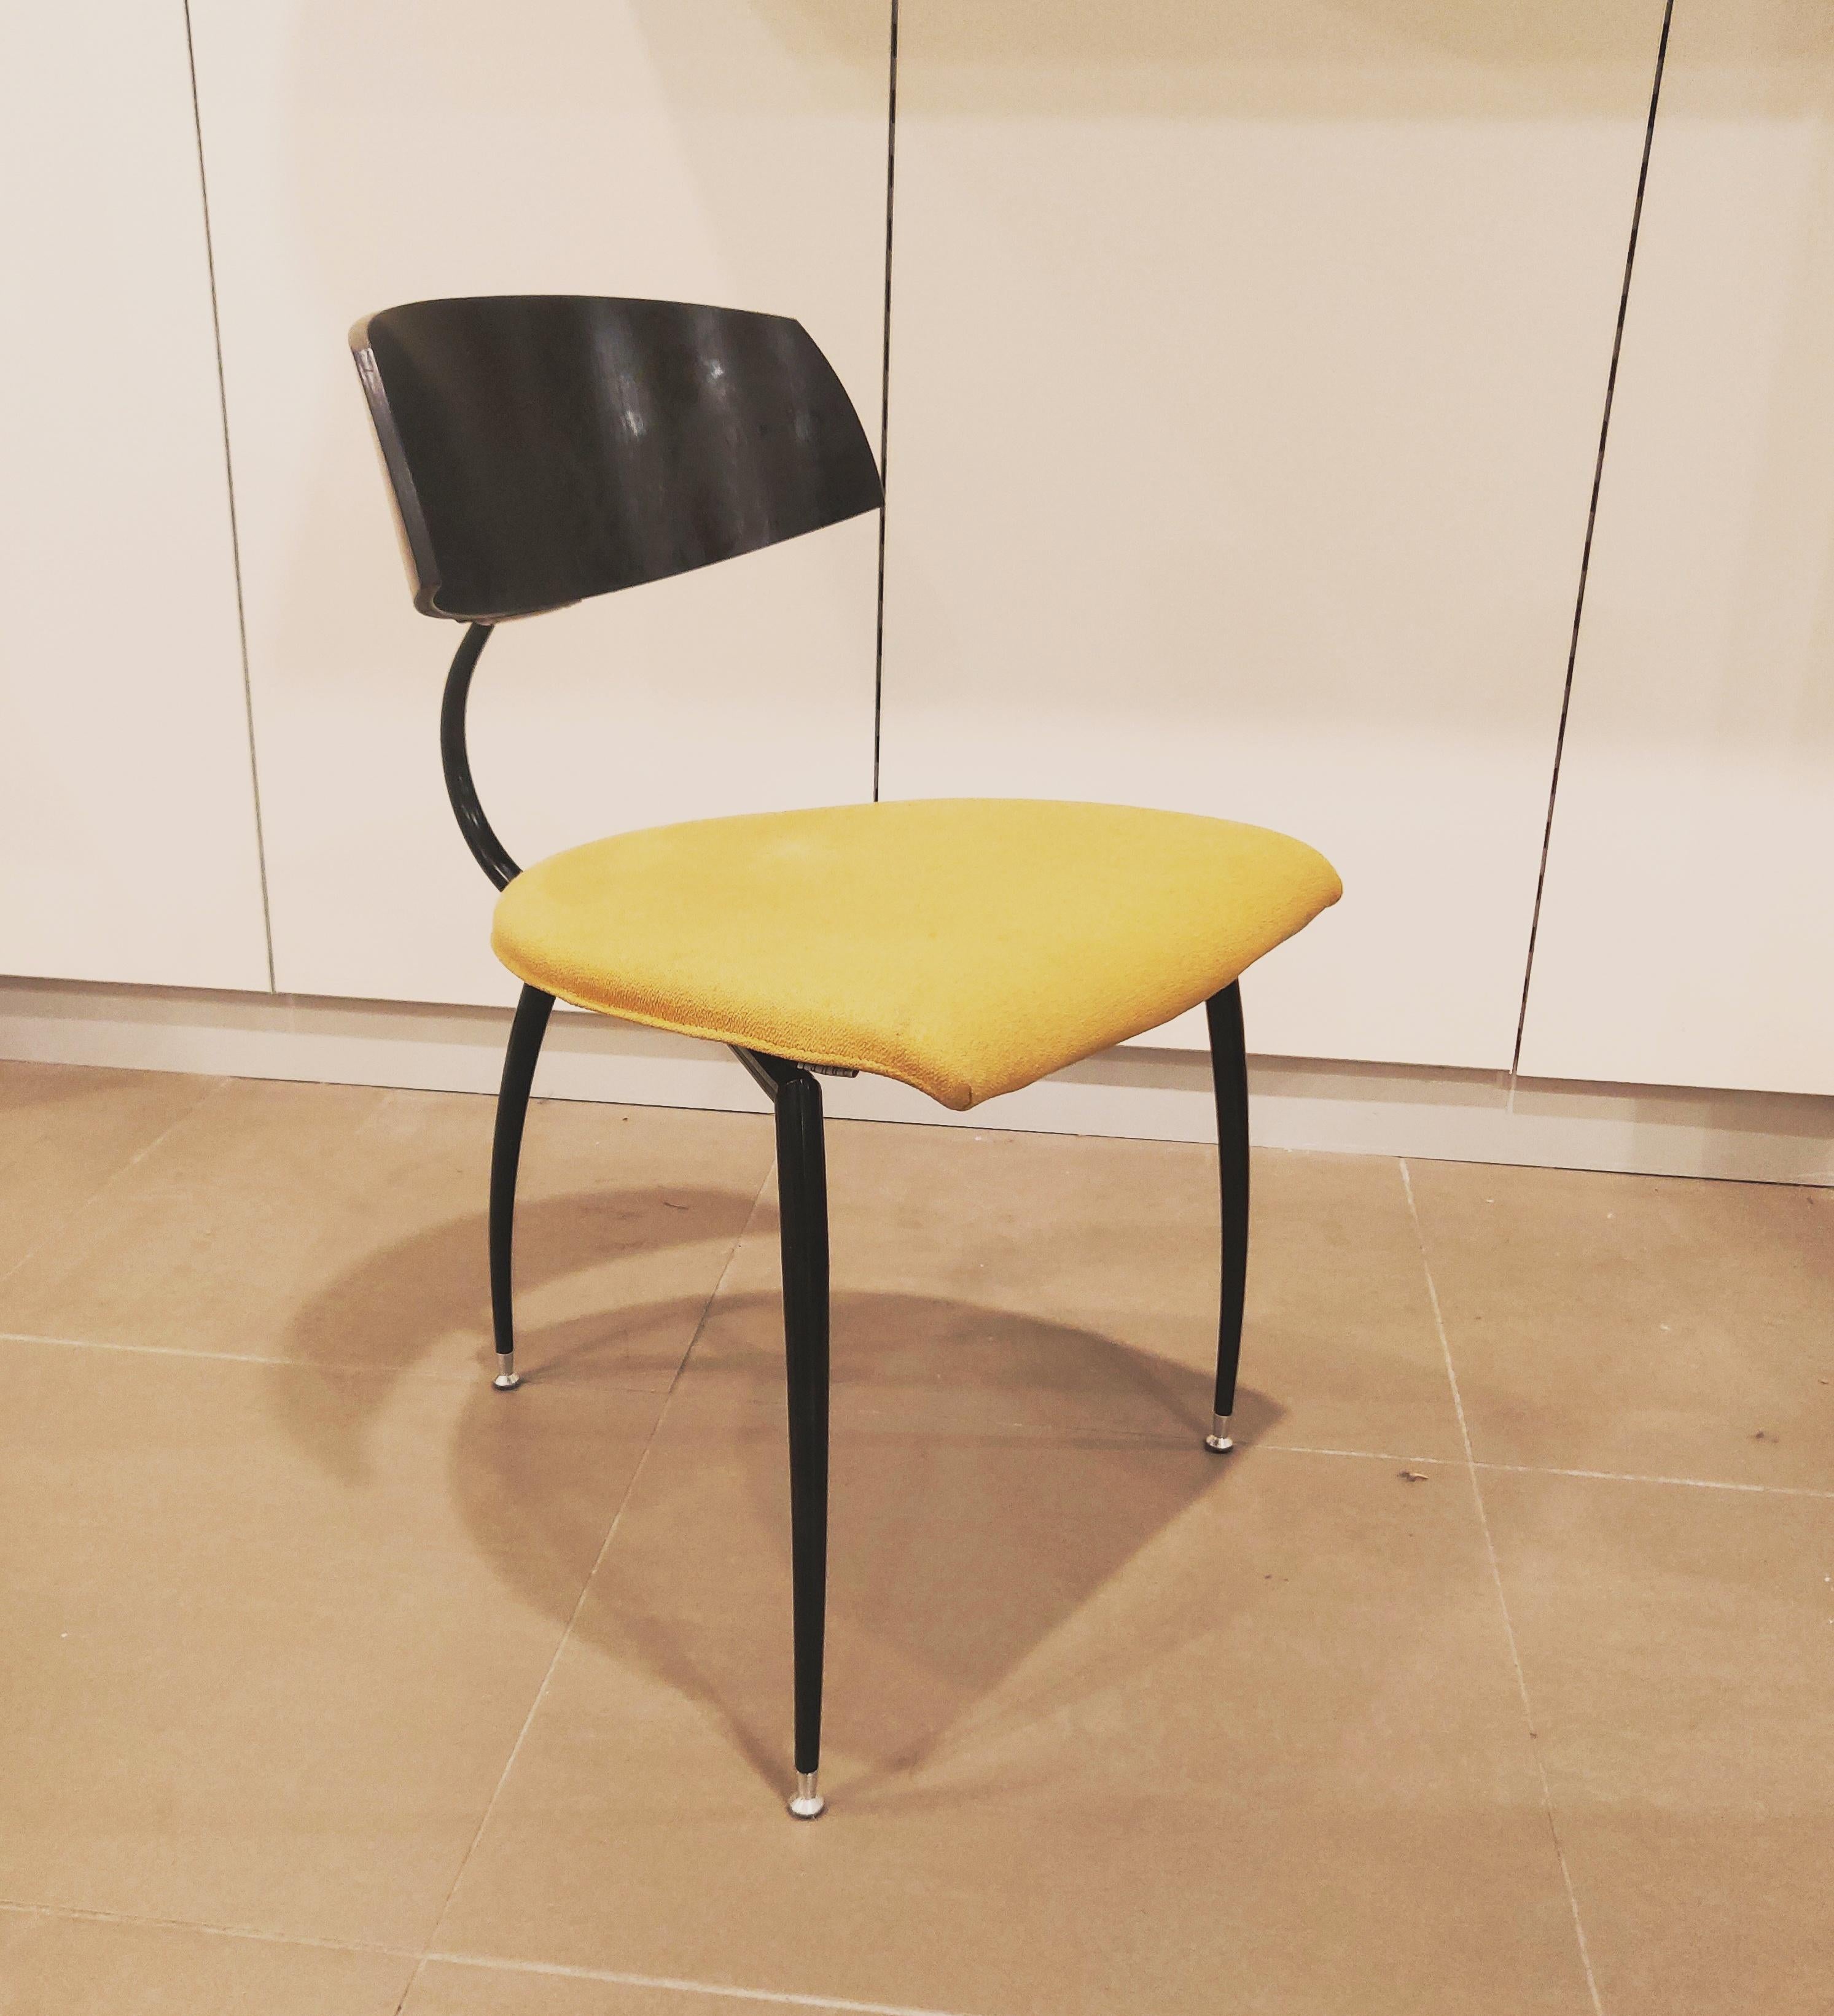 Dutch Design minimalistic tripod chair by Lande, 1980s. Black metal frame, floating wooden back with aluminum connector. another piece in different color seat available.

BAA#00149.